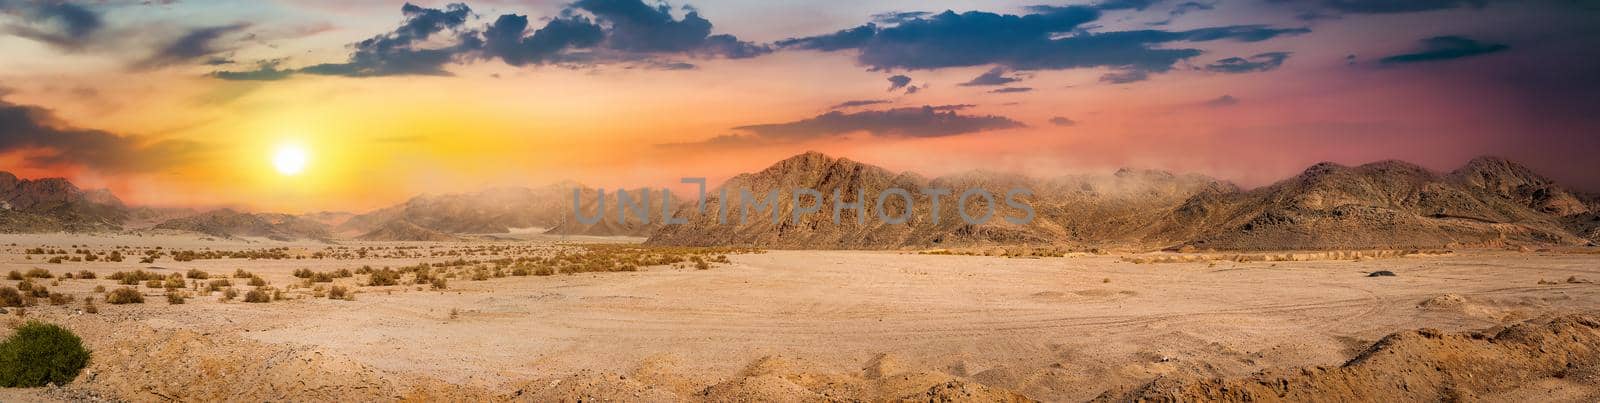 Desert and mountains at sunrise by Givaga